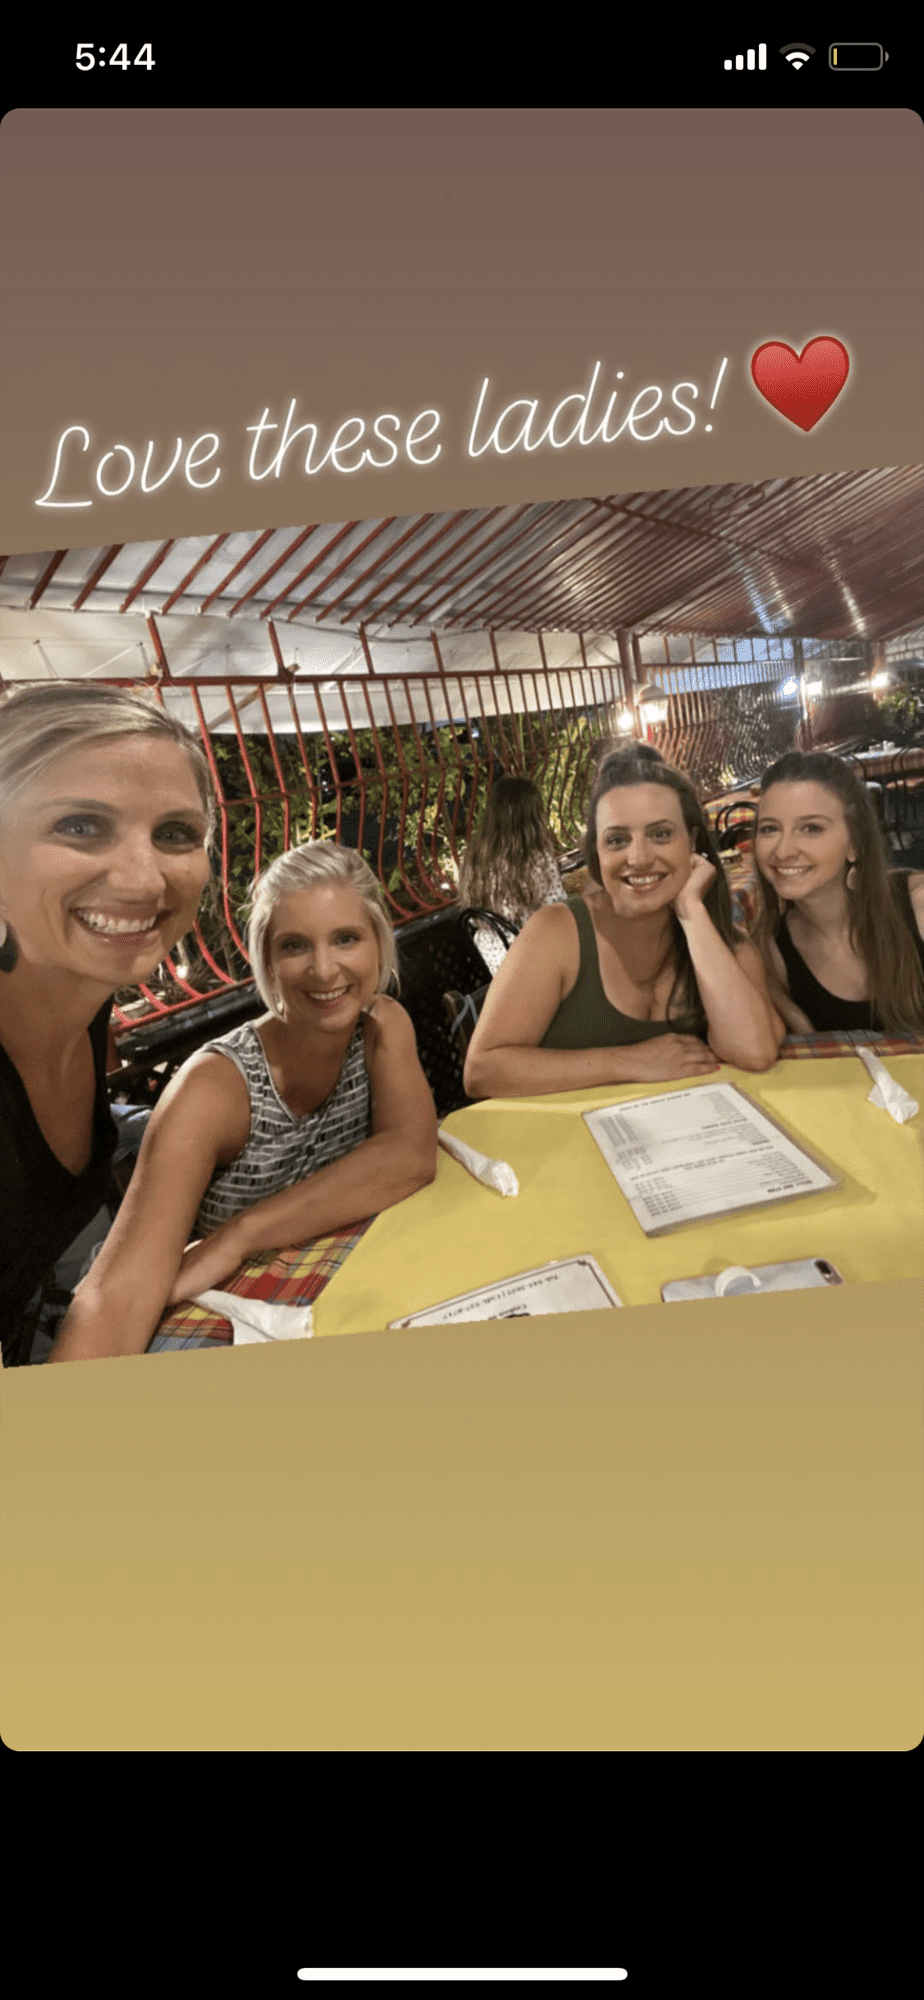 Four women smiling at a restaurant table.